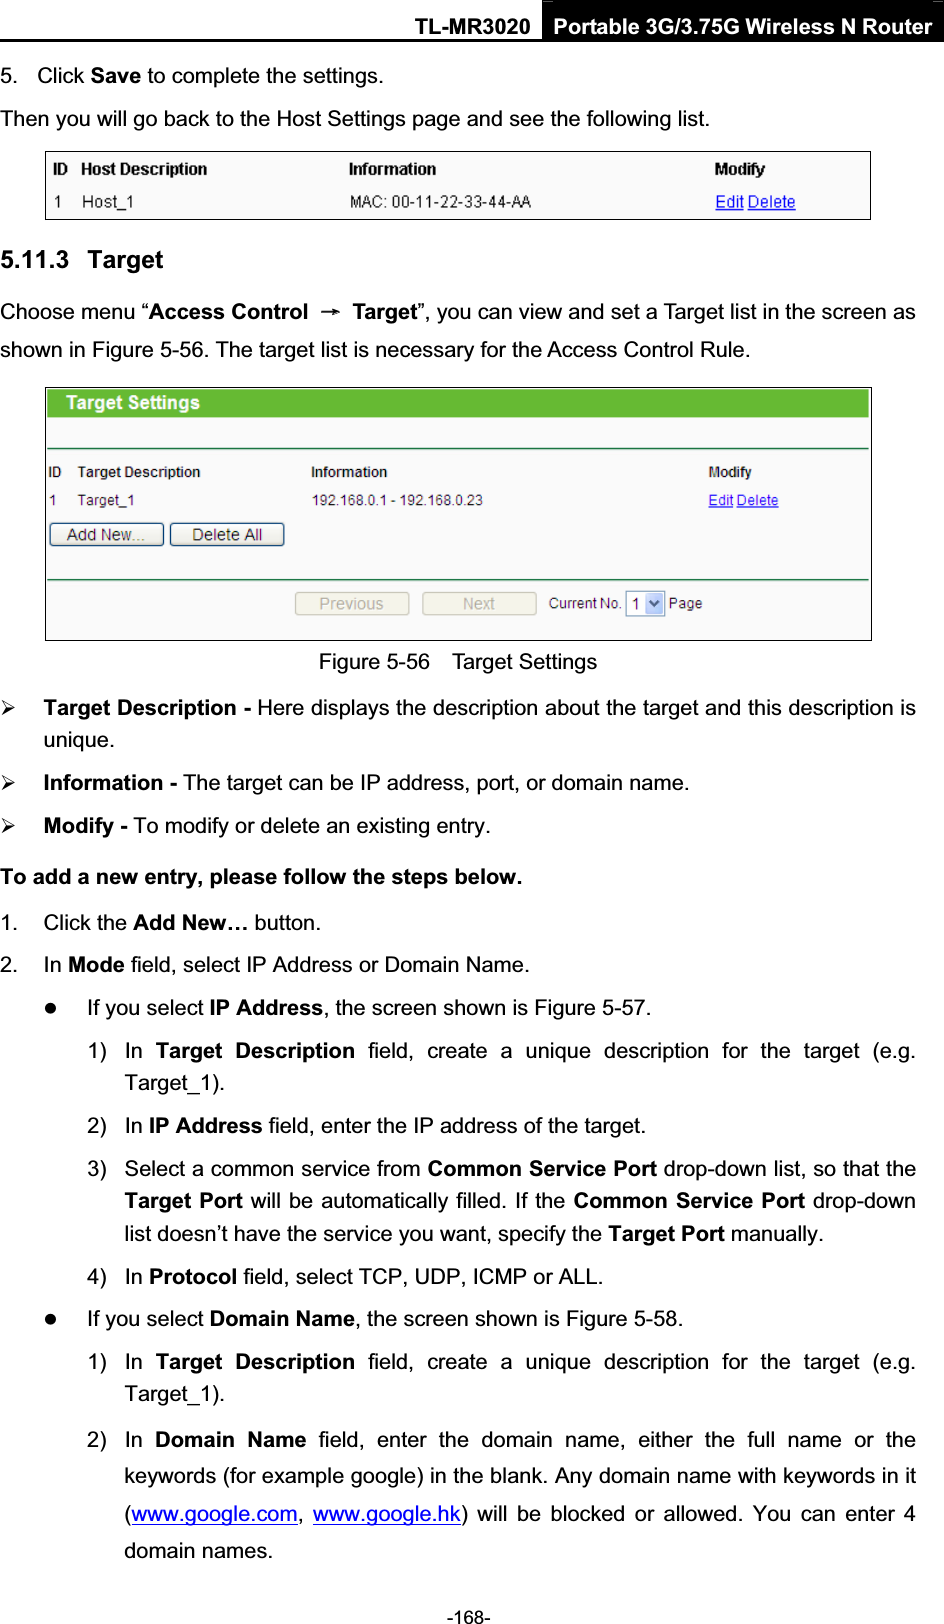 TL-MR3020 Portable 3G/3.75G Wireless N Router-168-5.  Click Save to complete the settings.   Then you will go back to the Host Settings page and see the following list. 5.11.3  Target Choose menu “Access Control  ė  Target”, you can view and set a Target list in the screen as shown in Figure 5-56. The target list is necessary for the Access Control Rule. Figure 5-56    Target Settings¾Target Description - Here displays the description about the target and this description is unique.¾Information - The target can be IP address, port, or domain name.   ¾Modify - To modify or delete an existing entry.   To add a new entry, please follow the steps below.1.  Click the Add New… button. 2.  In Mode field, select IP Address or Domain Name. zIf you select IP Address, the screen shown is Figure 5-57.   1)  In  Target  Description  field,  create  a  unique  description  for  the  target  (e.g. Target_1). 2)  In IP Address field, enter the IP address of the target. 3)  Select a common service from Common Service Port drop-down list, so that the Target Port will be automatically filled. If the Common Service Port drop-down list doesn’t have the service you want, specify the Target Port manually. 4)  In Protocol field, select TCP, UDP, ICMP or ALL.zIf you select Domain Name, the screen shown is Figure 5-58. 1)  In  Target  Description  field,  create  a  unique  description  for  the  target  (e.g. Target_1). 2)  In  Domain  Name  field,  enter  the  domain  name,  either  the  full  name  or  the keywords (for example google) in the blank. Any domain name with keywords in it (www.google.com,www.google.hk)  will  be  blocked  or  allowed.  You  can  enter  4 domain names. 